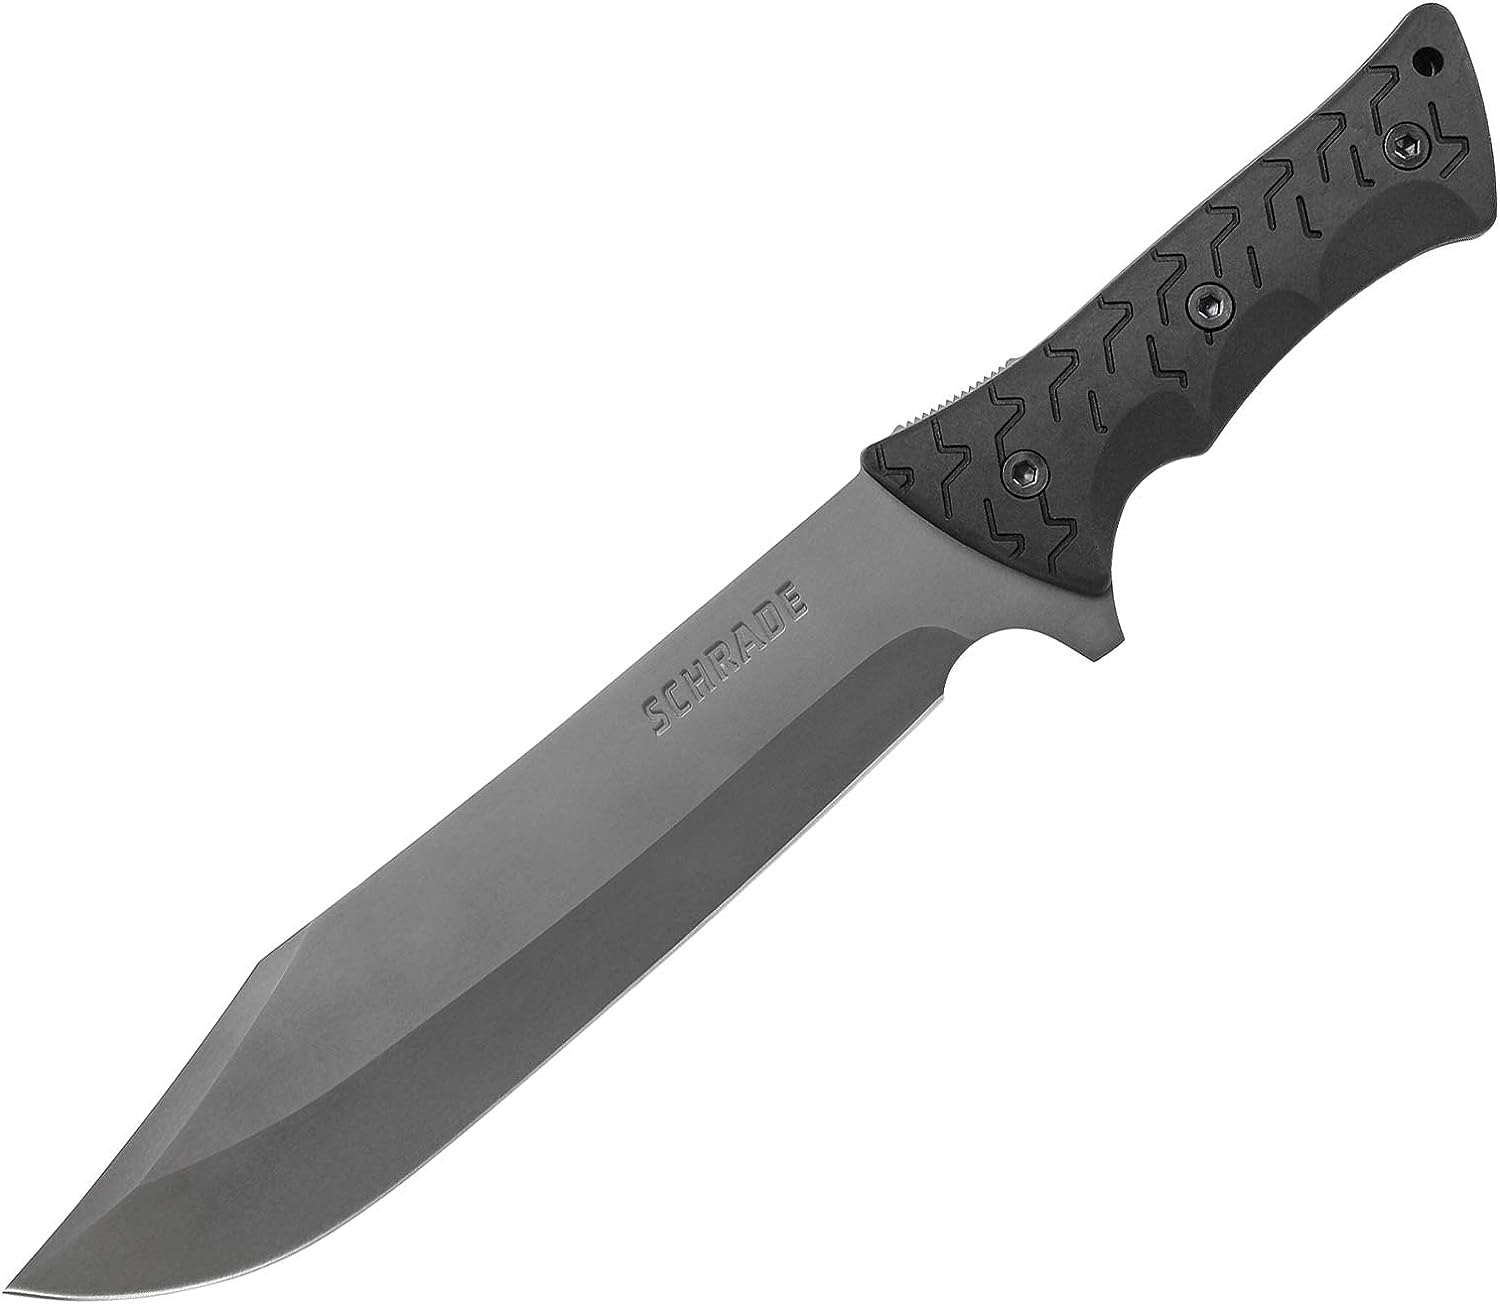 Schrade Little Ricky Full Tang Knife, Titanium Coated 8Cr13MoV $27.48 (deal live again) or Schrade Leroy Fixed Bowie Blade $30.19